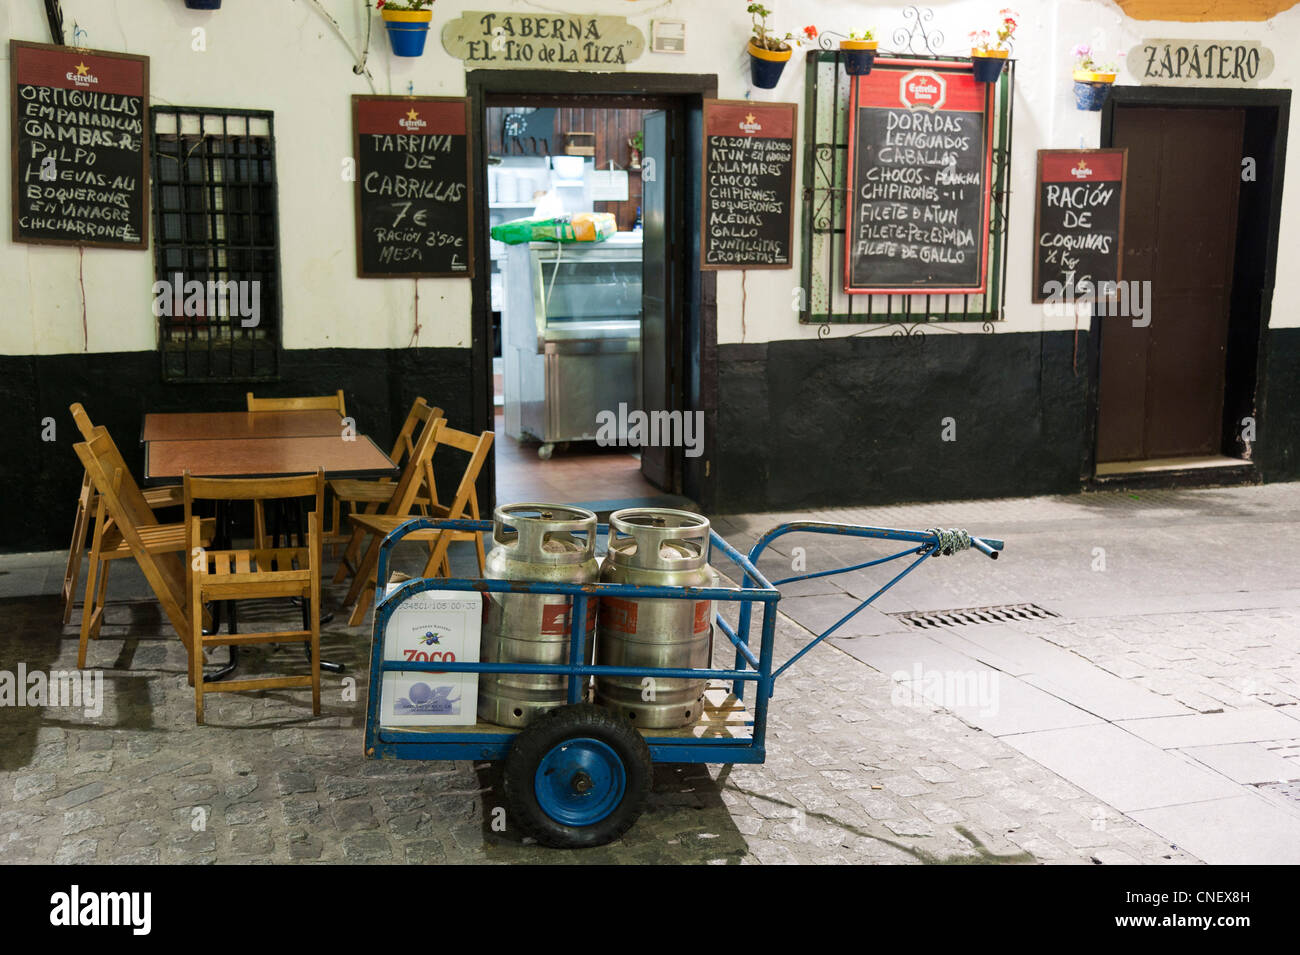 propane gas bottles on hand cart in front of bar in Cadiz, Andalusia, Spain Stock Photo